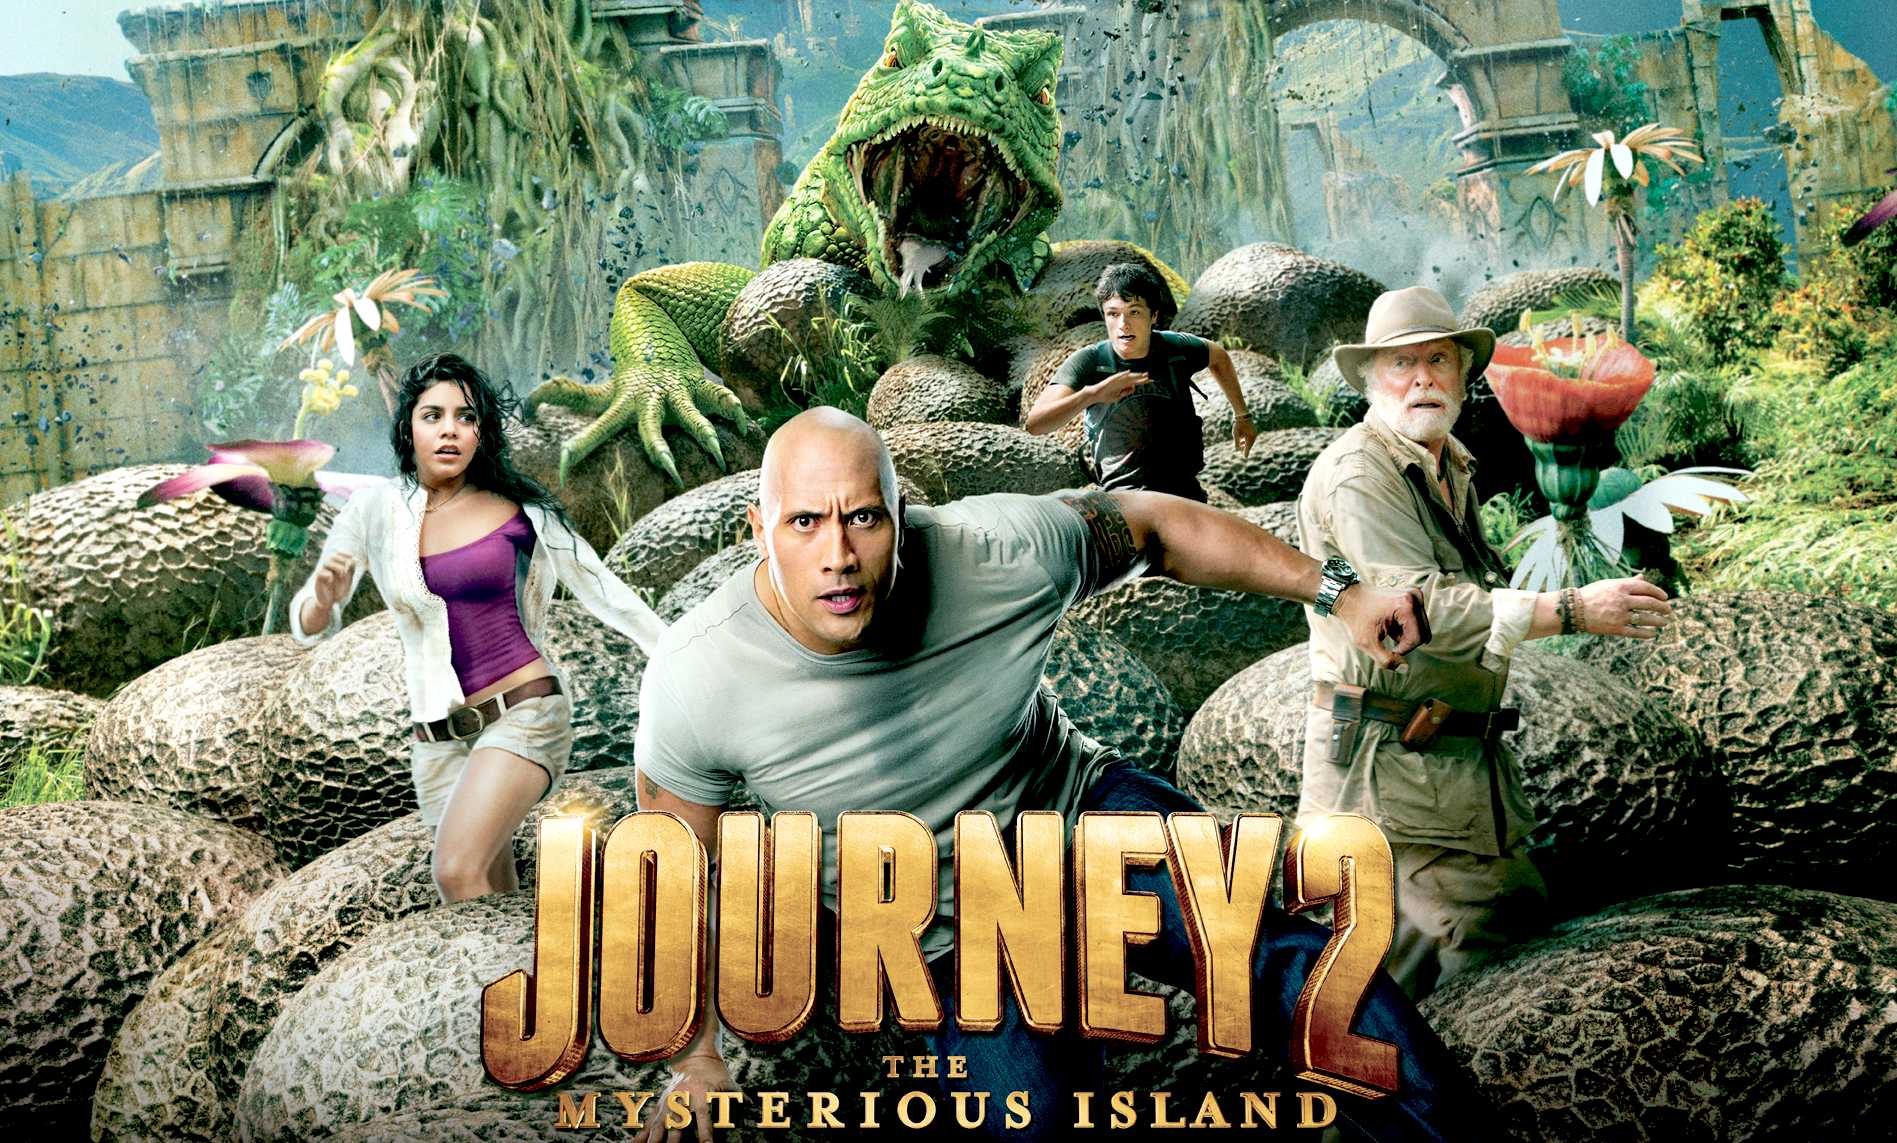 Dwayne Johnson and Michael Caine in Journey 2 the Mysterious Island by Jules Verne